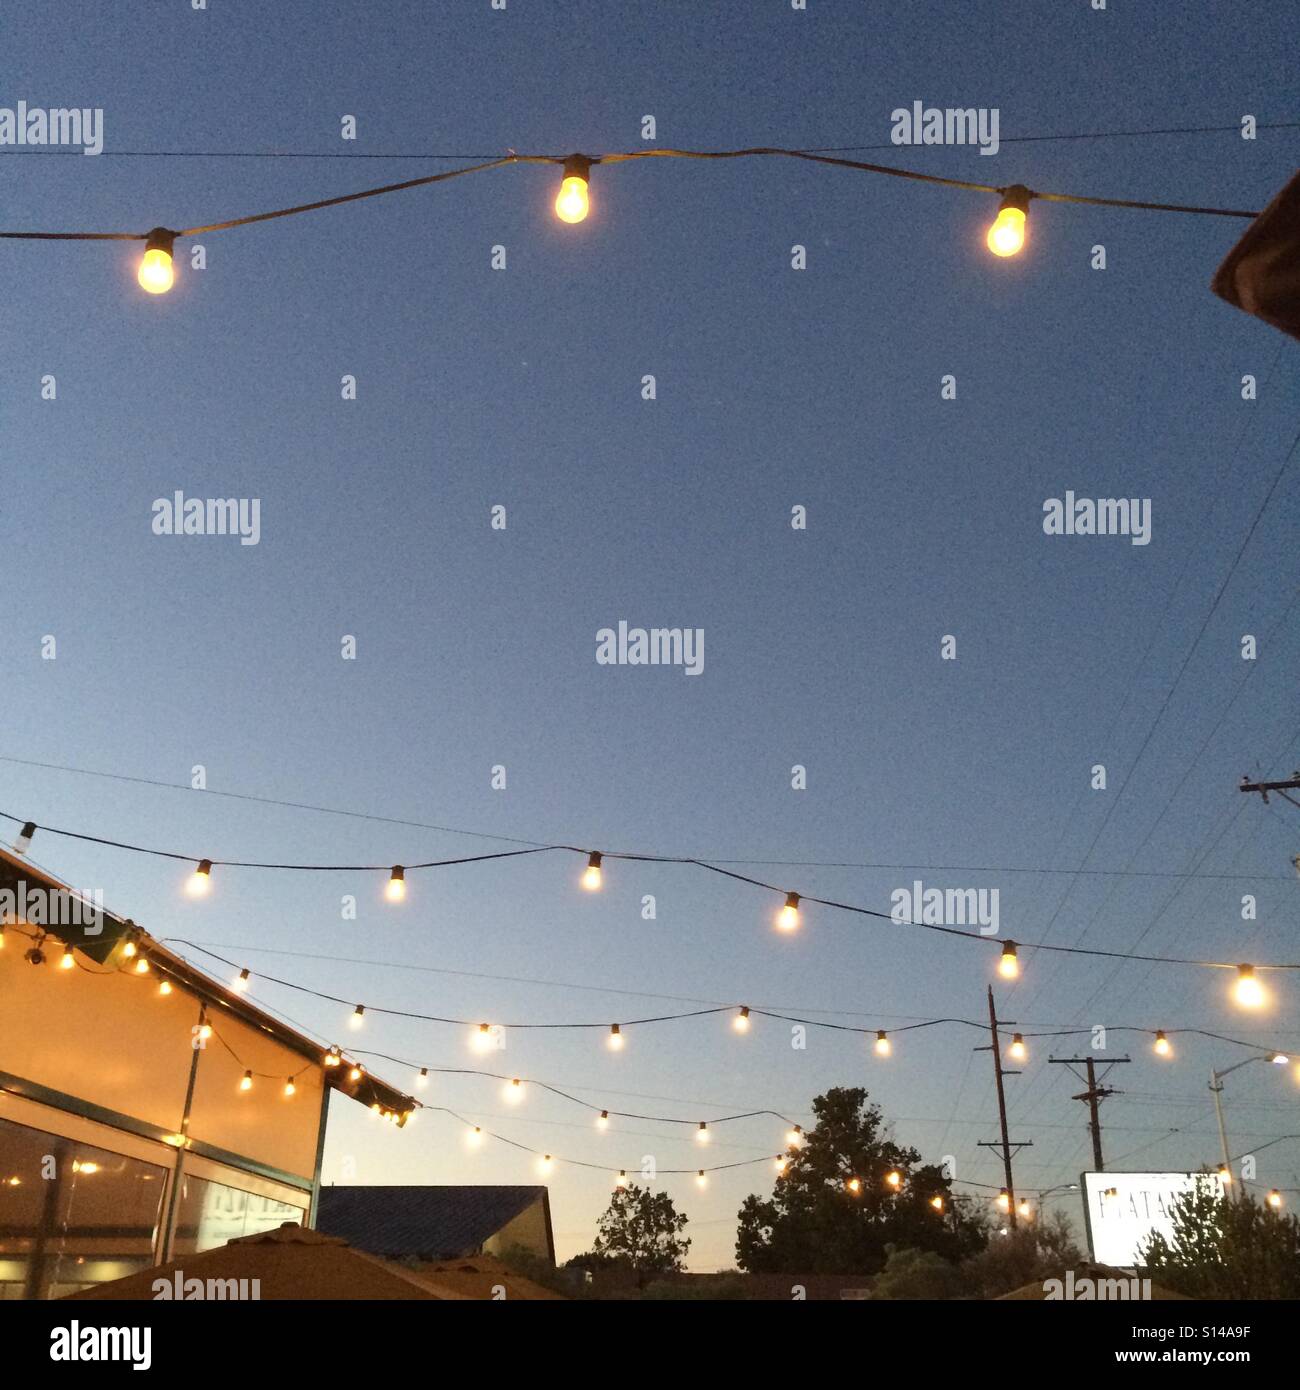 Patio lights in the evening. Stock Photo